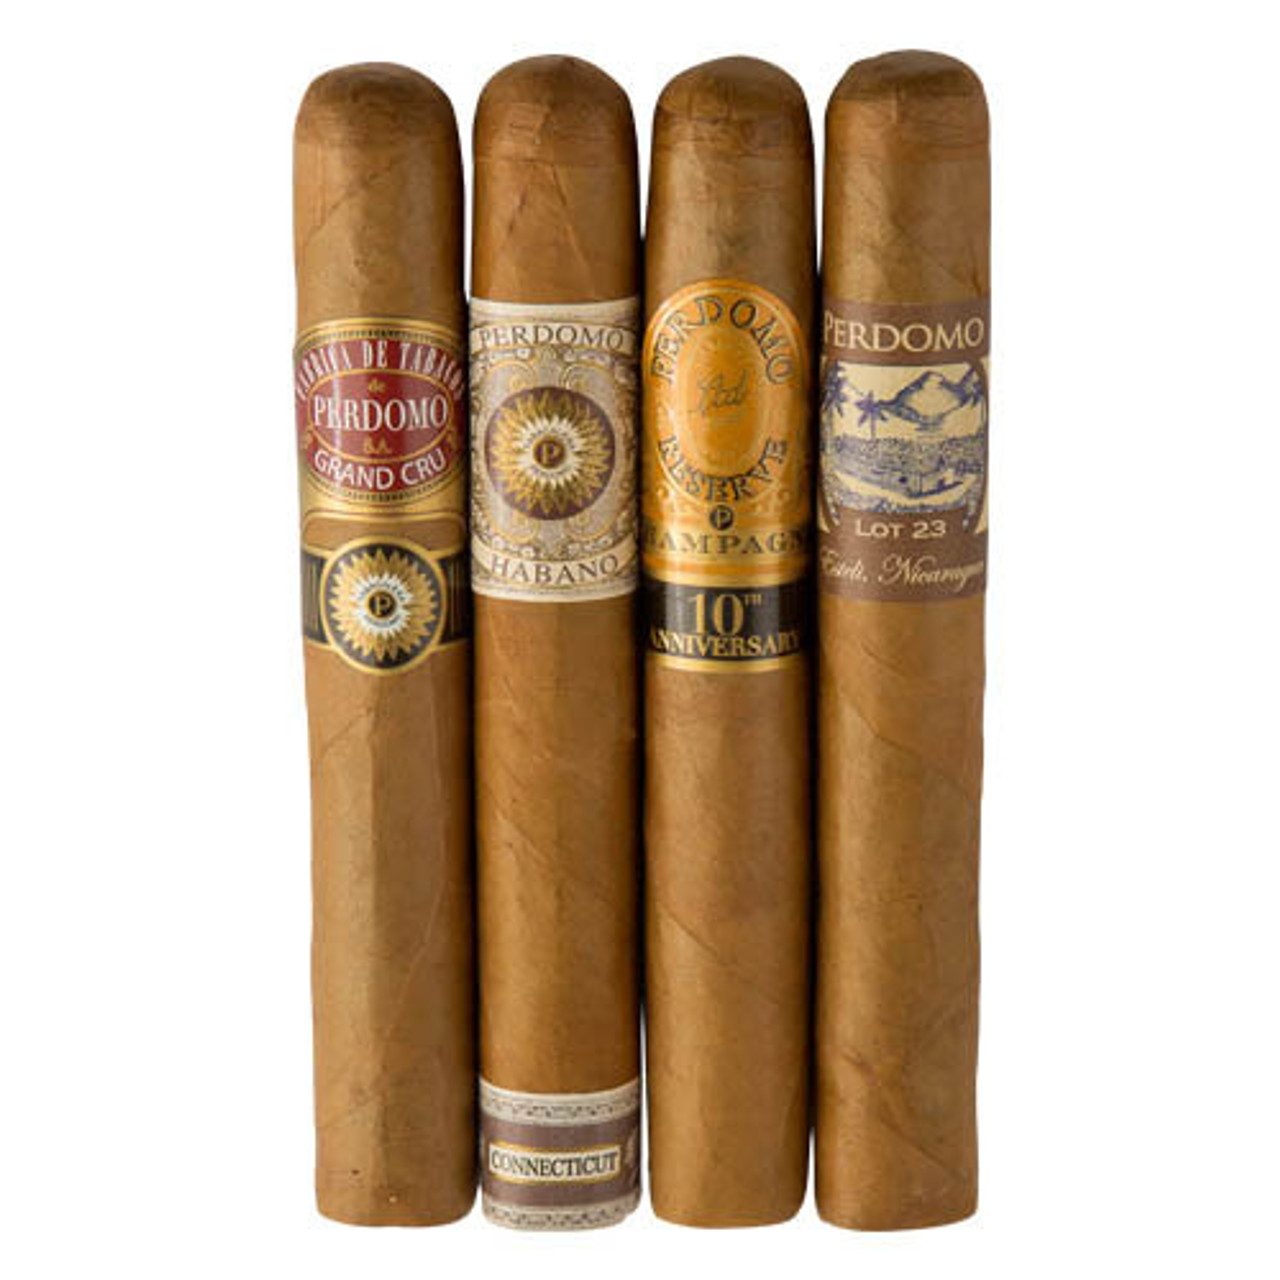 Cigar Samplers Perdomo 4-Pack Humidified Connecticut Sampler (Pack of 4) *Box